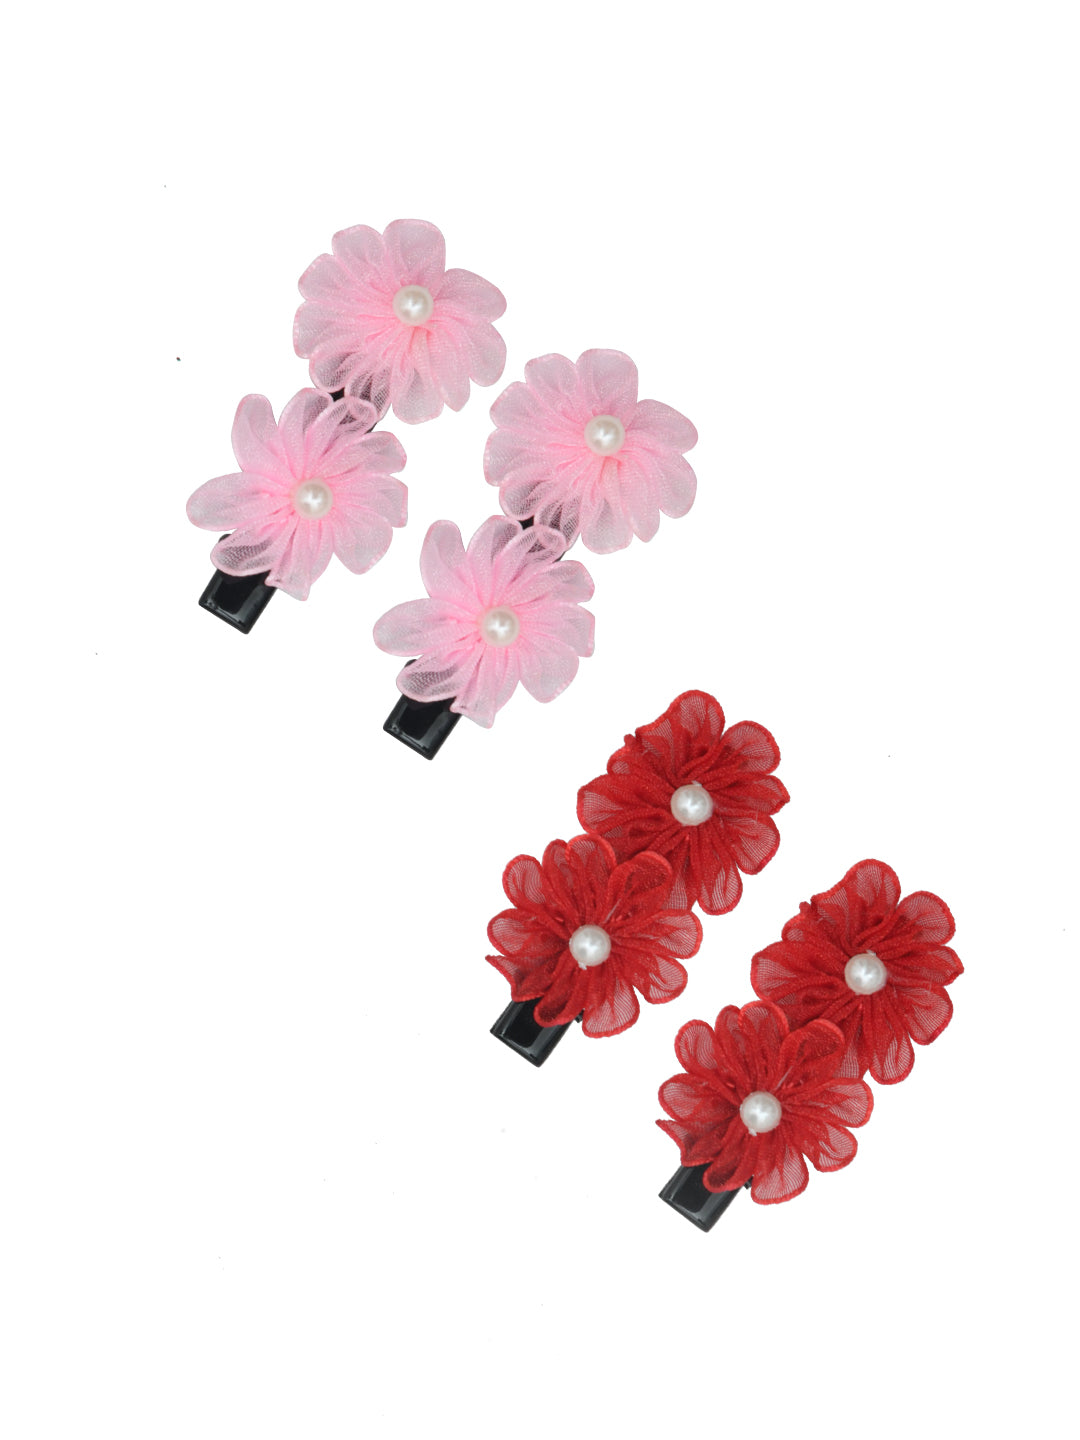 Pack of 4 Multicolor Pretty Floral Hair Clips for Girls